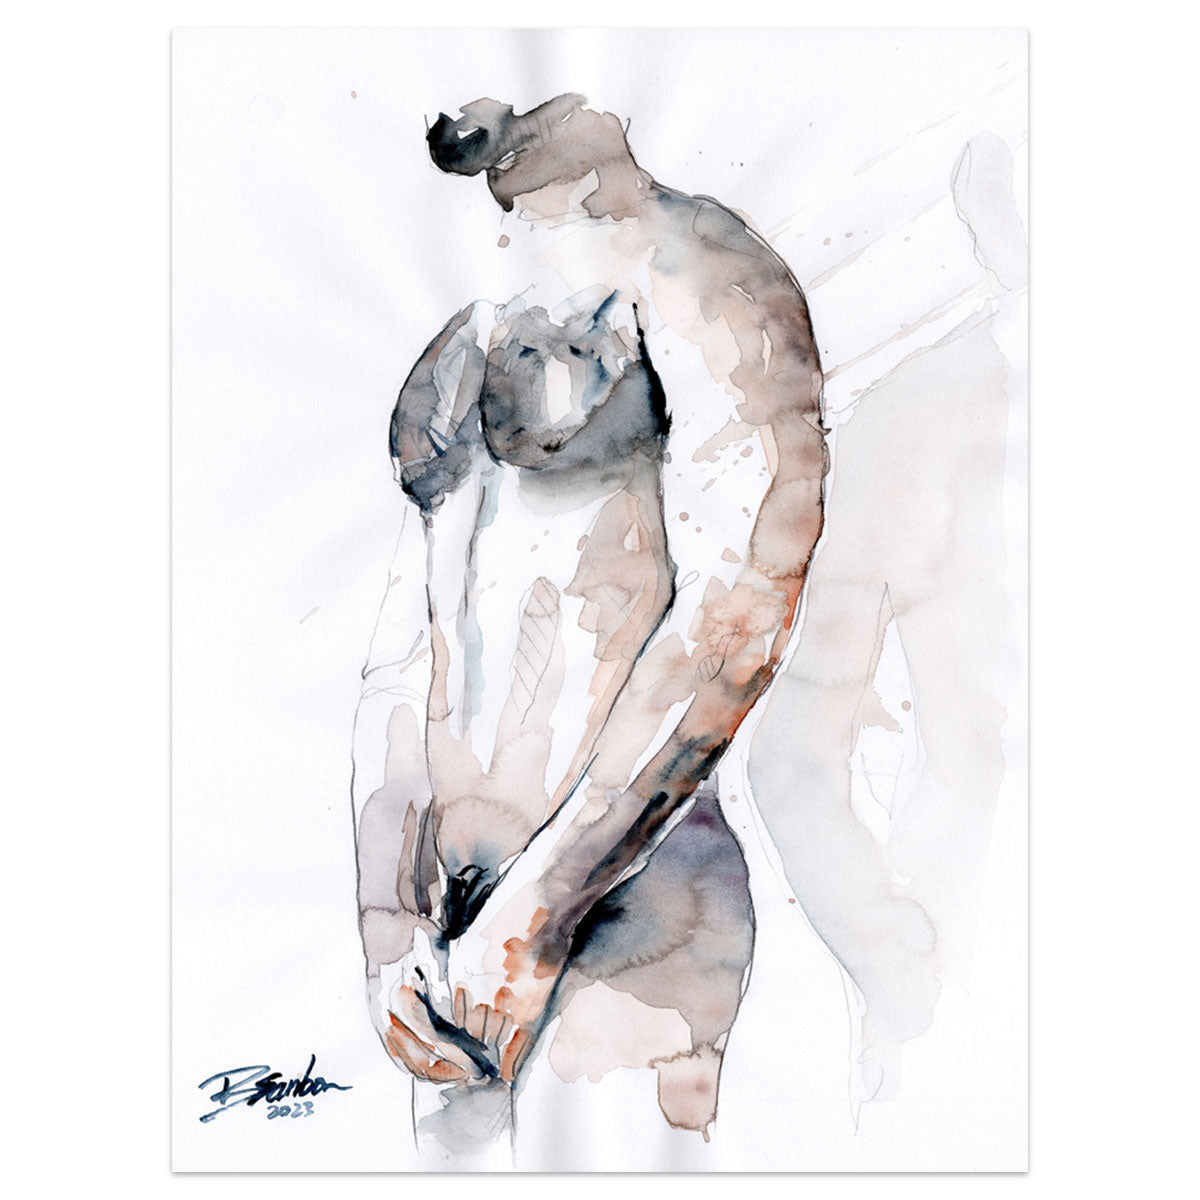 Lean Male Figure, Delicate Pose with Subtle Strength - 9x12" Original Watercolor Painting